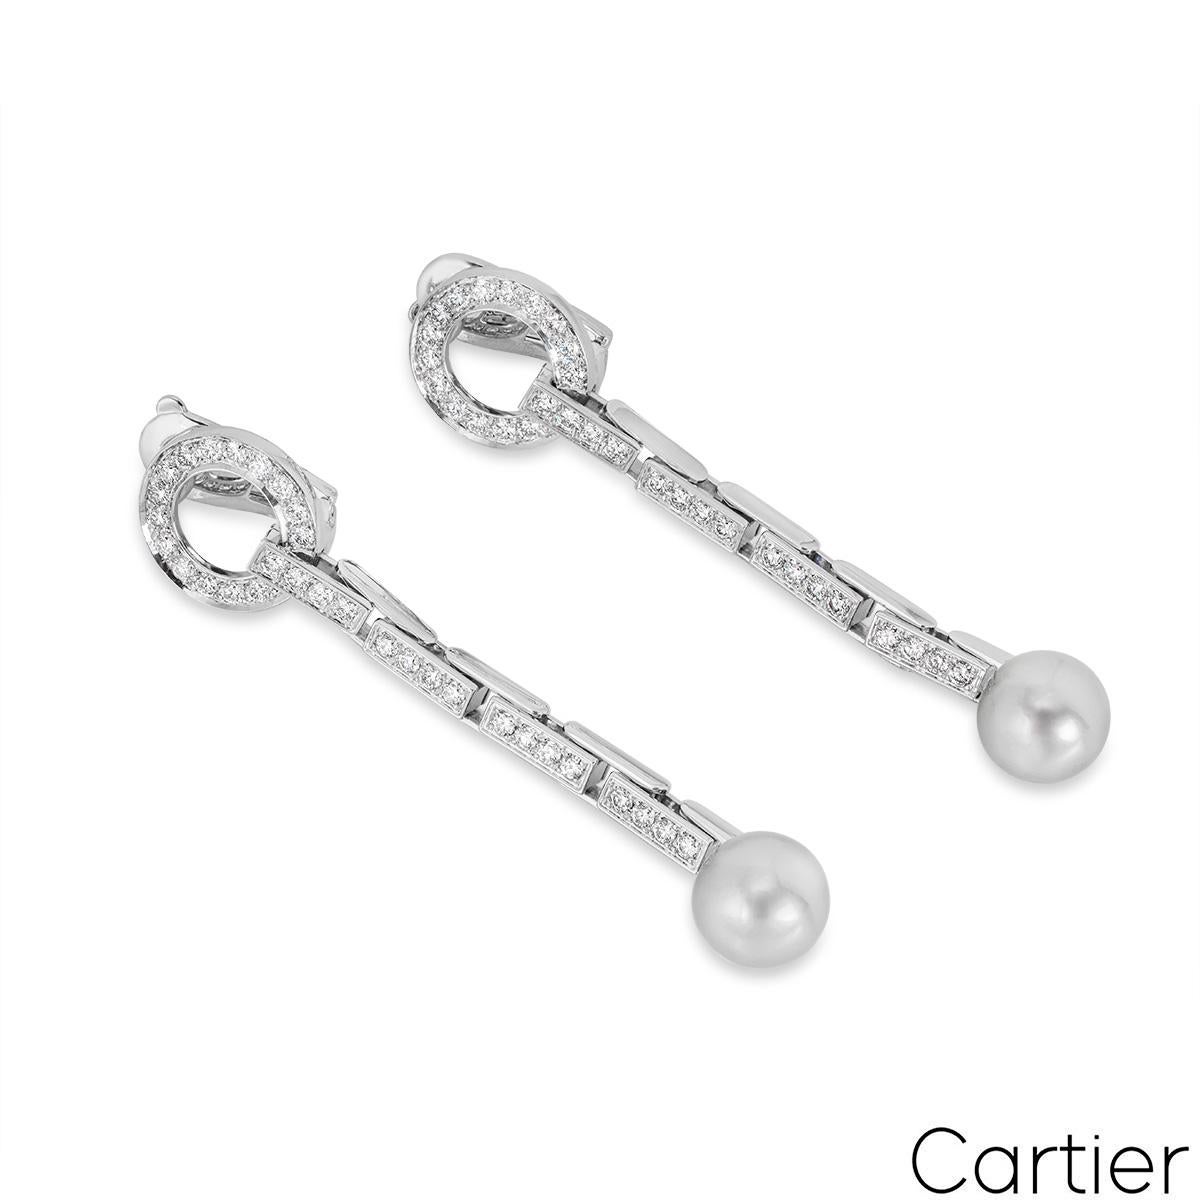 An impeccable pair of 18k white gold pearl and diamond earrings by Cartier from the Agrafe collection. The earrings comprise of a diamond set open work circular motif and 4 diamond set freely moving stations that lead to a 10mm light grey pearl. The